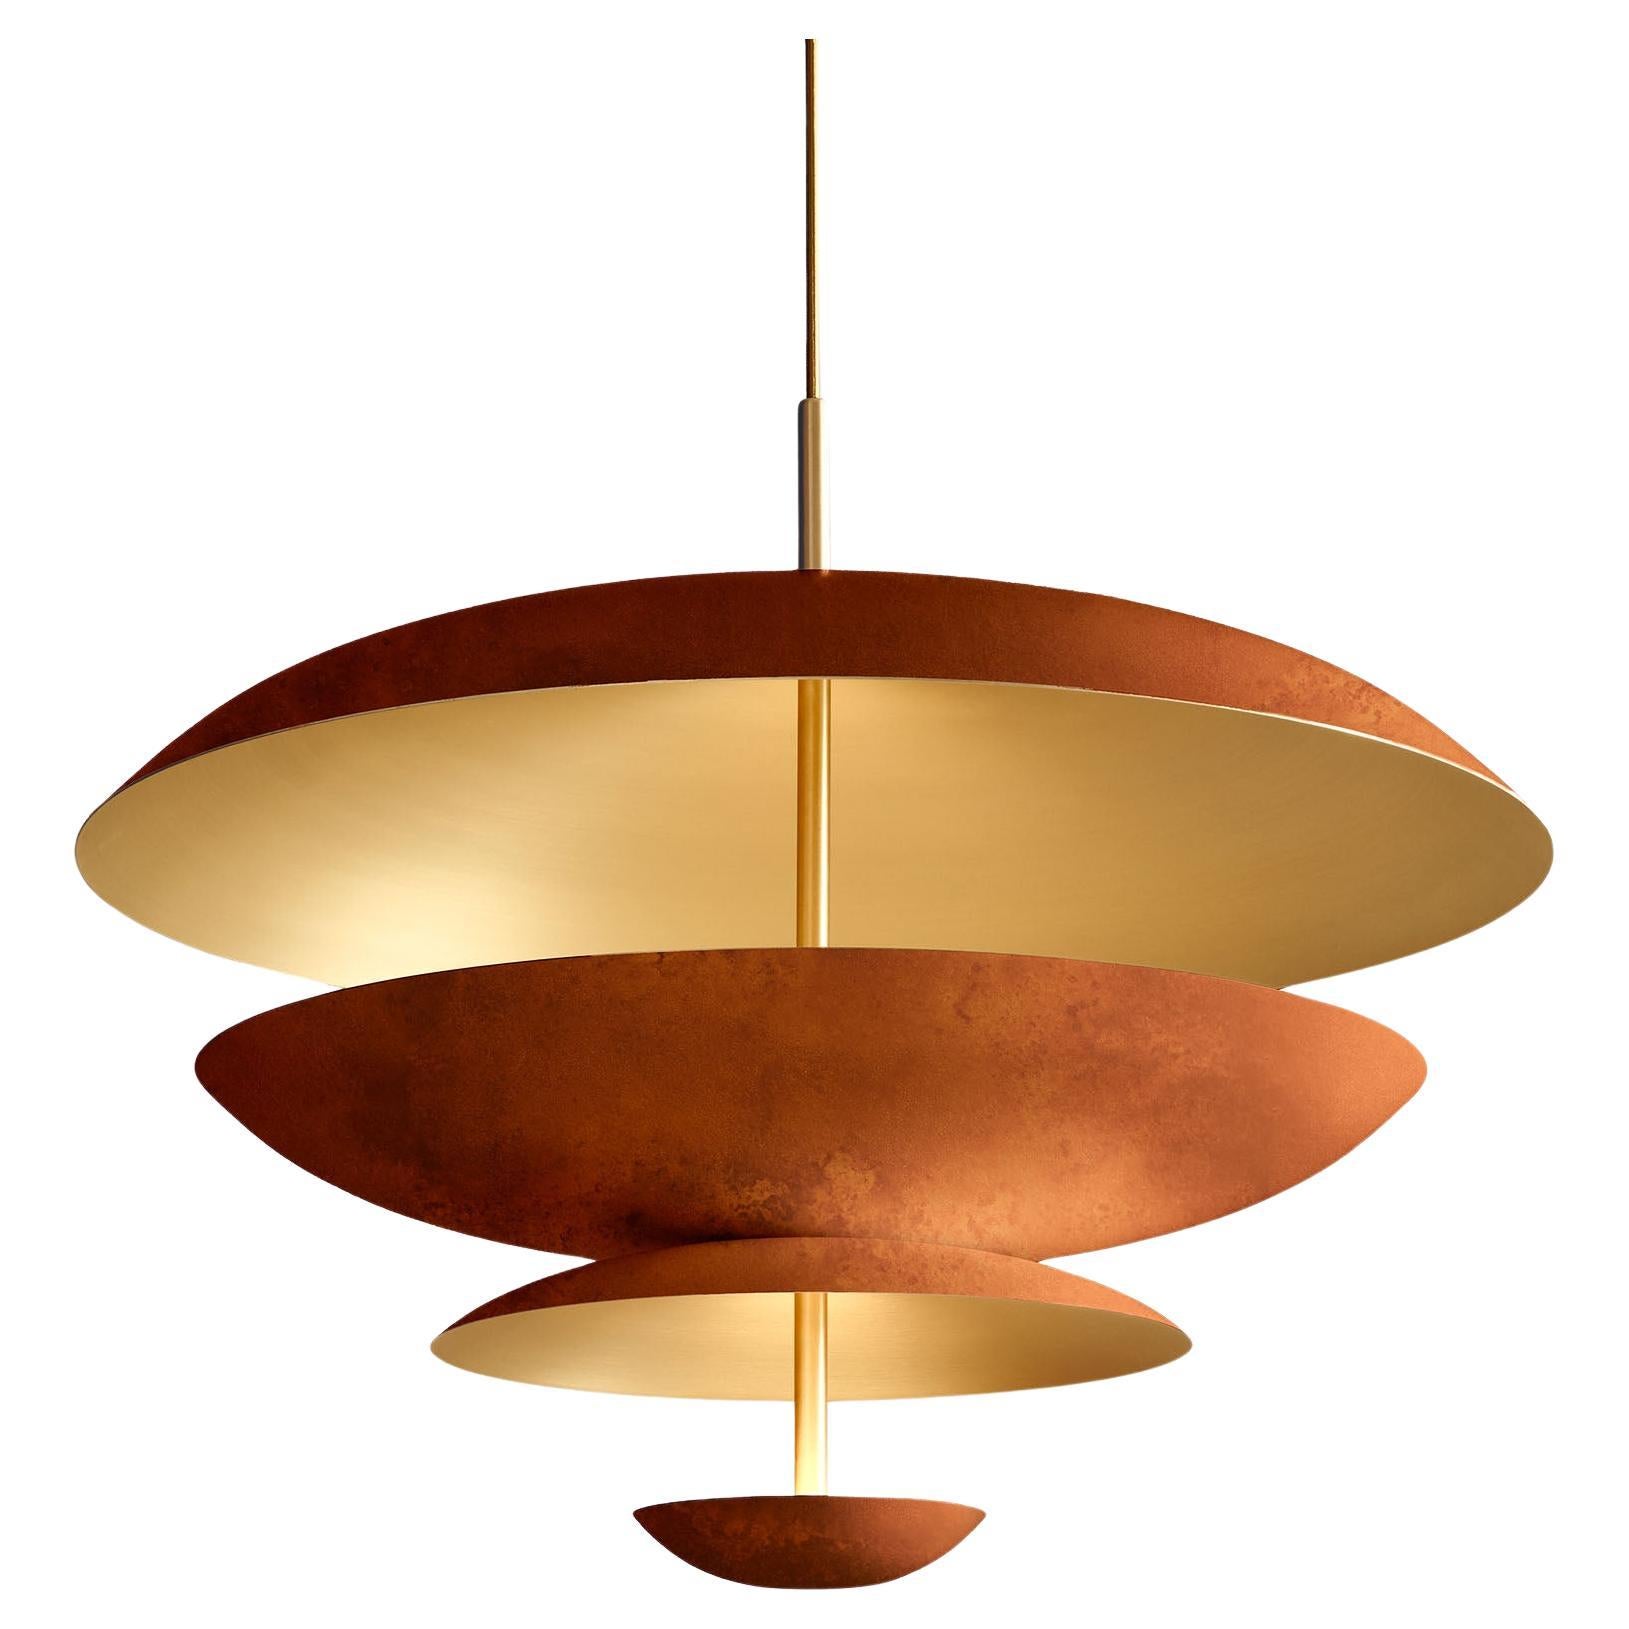 'Cosmic Rust Chandelier 100' Rust Patinated Brass Ceiling Light